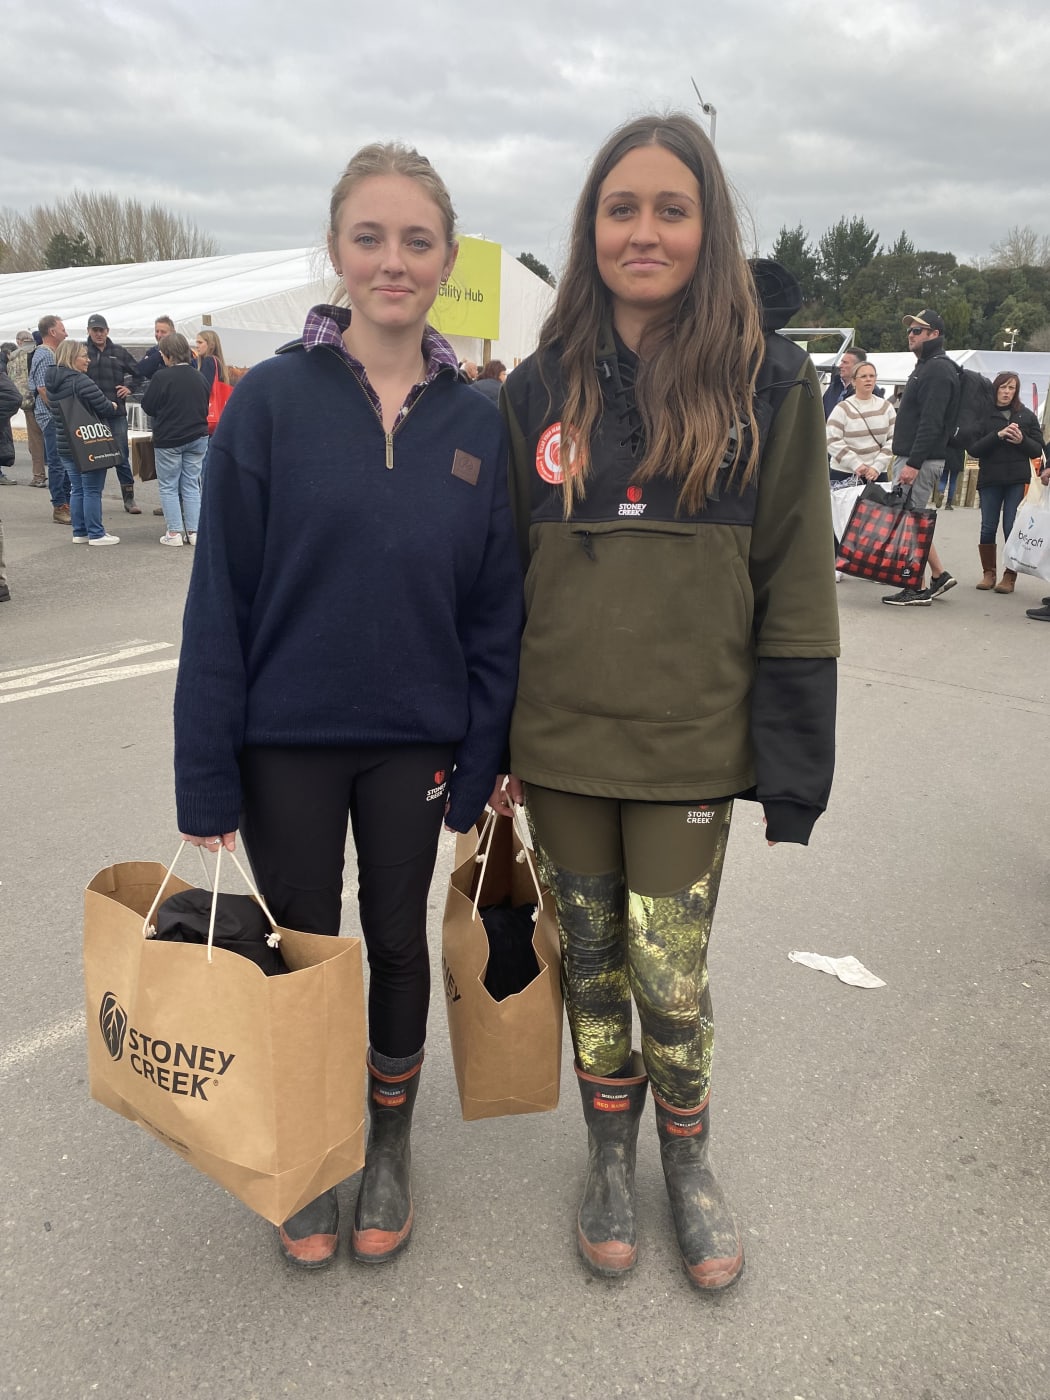 Brianna and Zoe. Briana (left) is wearing Swandri jersey. Zoe is wearing a Stoney Creek big dog  jacket and Stoney Creek thermal tights which are good for hunting and for keeping her warm. They come to field day for good deals on clothes.